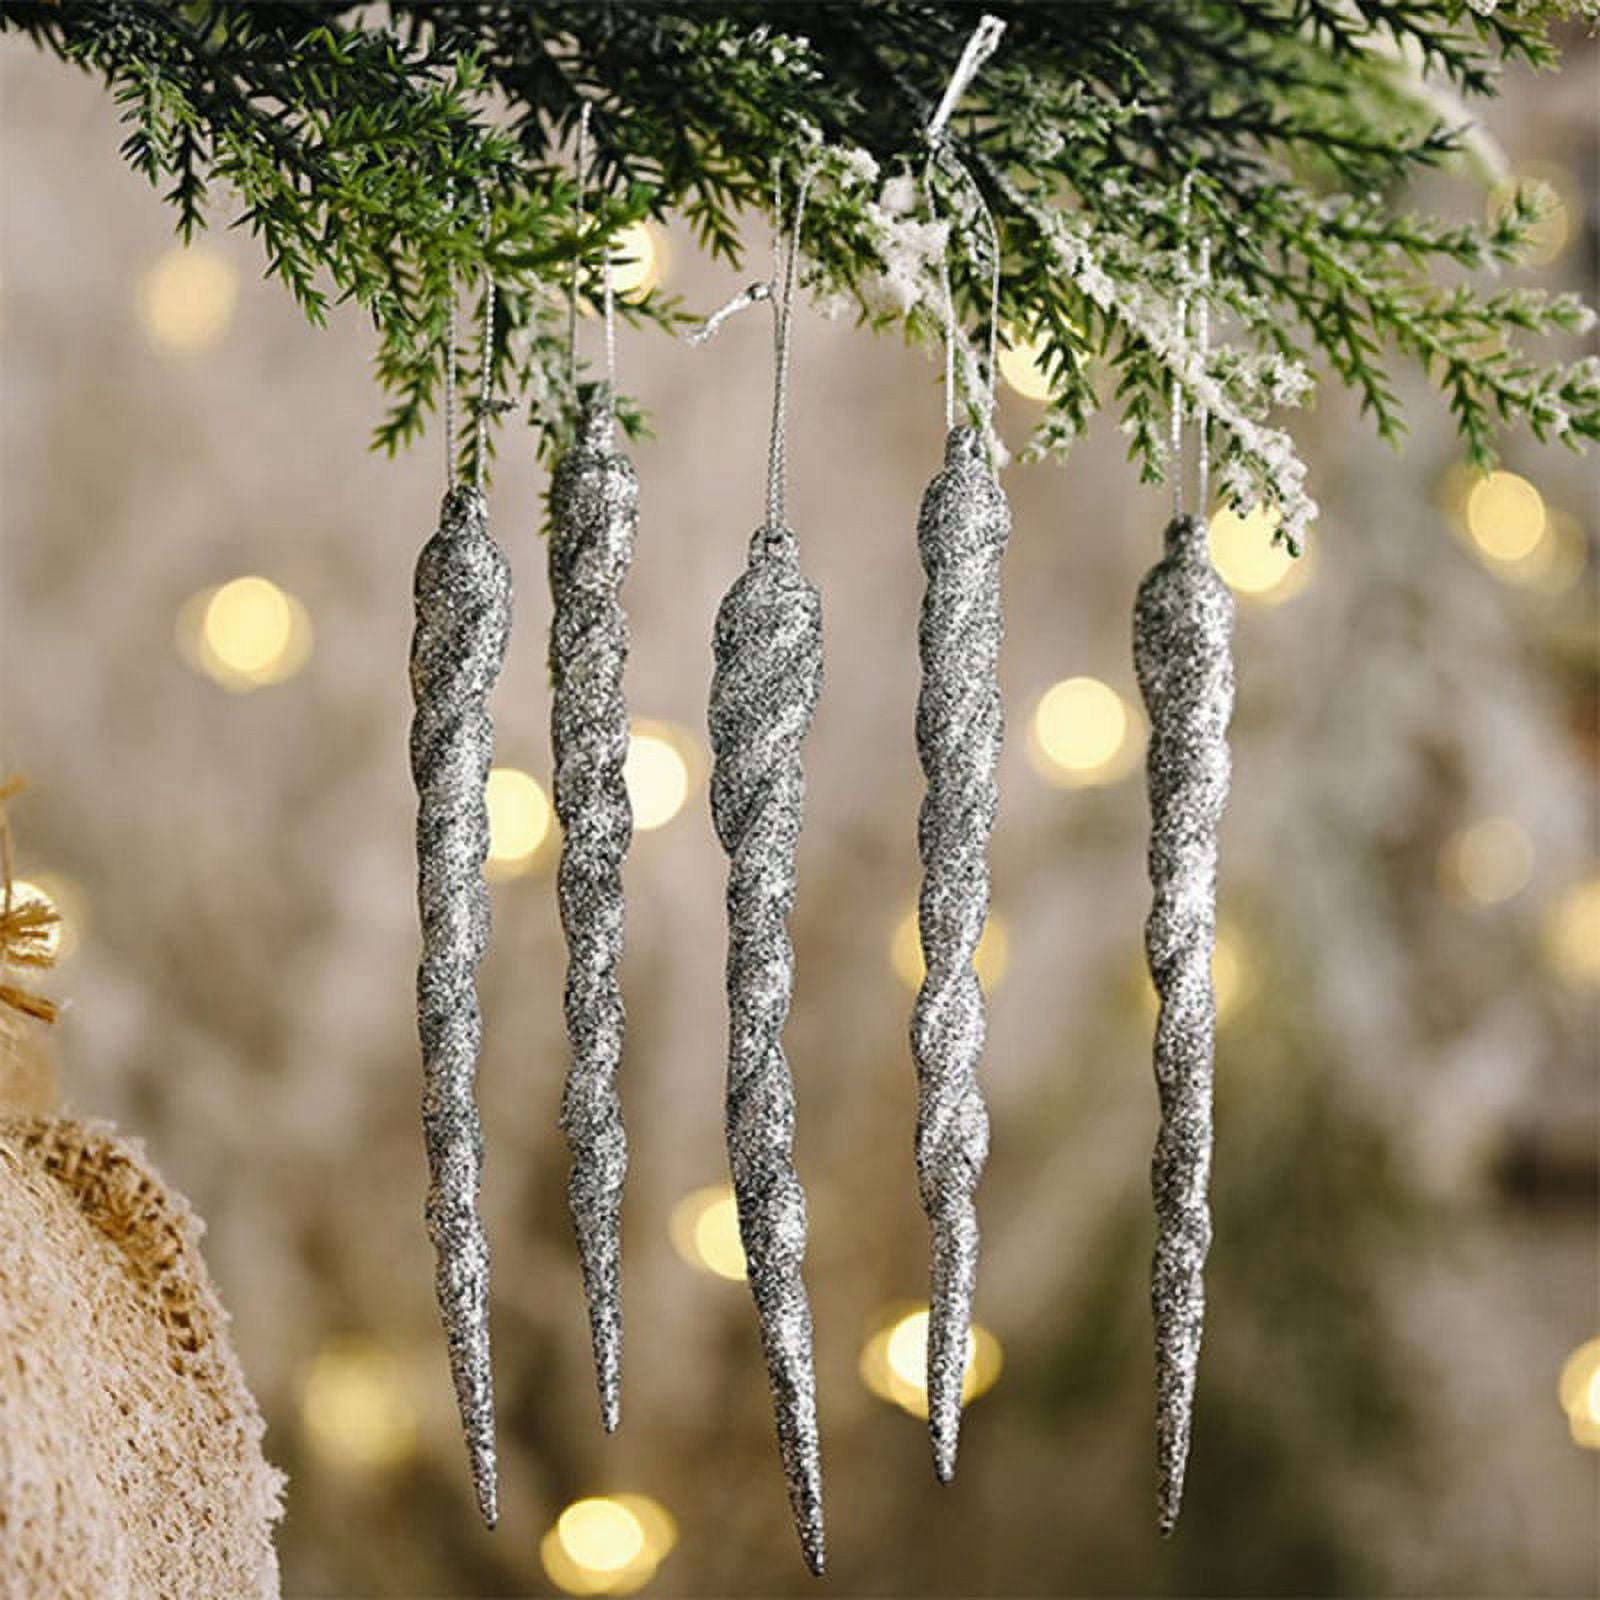 12 Pcs Christmas Icicle Snowflake Decor Clear Acrylic Indoor Outdoor  Festive Xmas Tree Hanging Ornament Garland Party Supplies - AliExpress